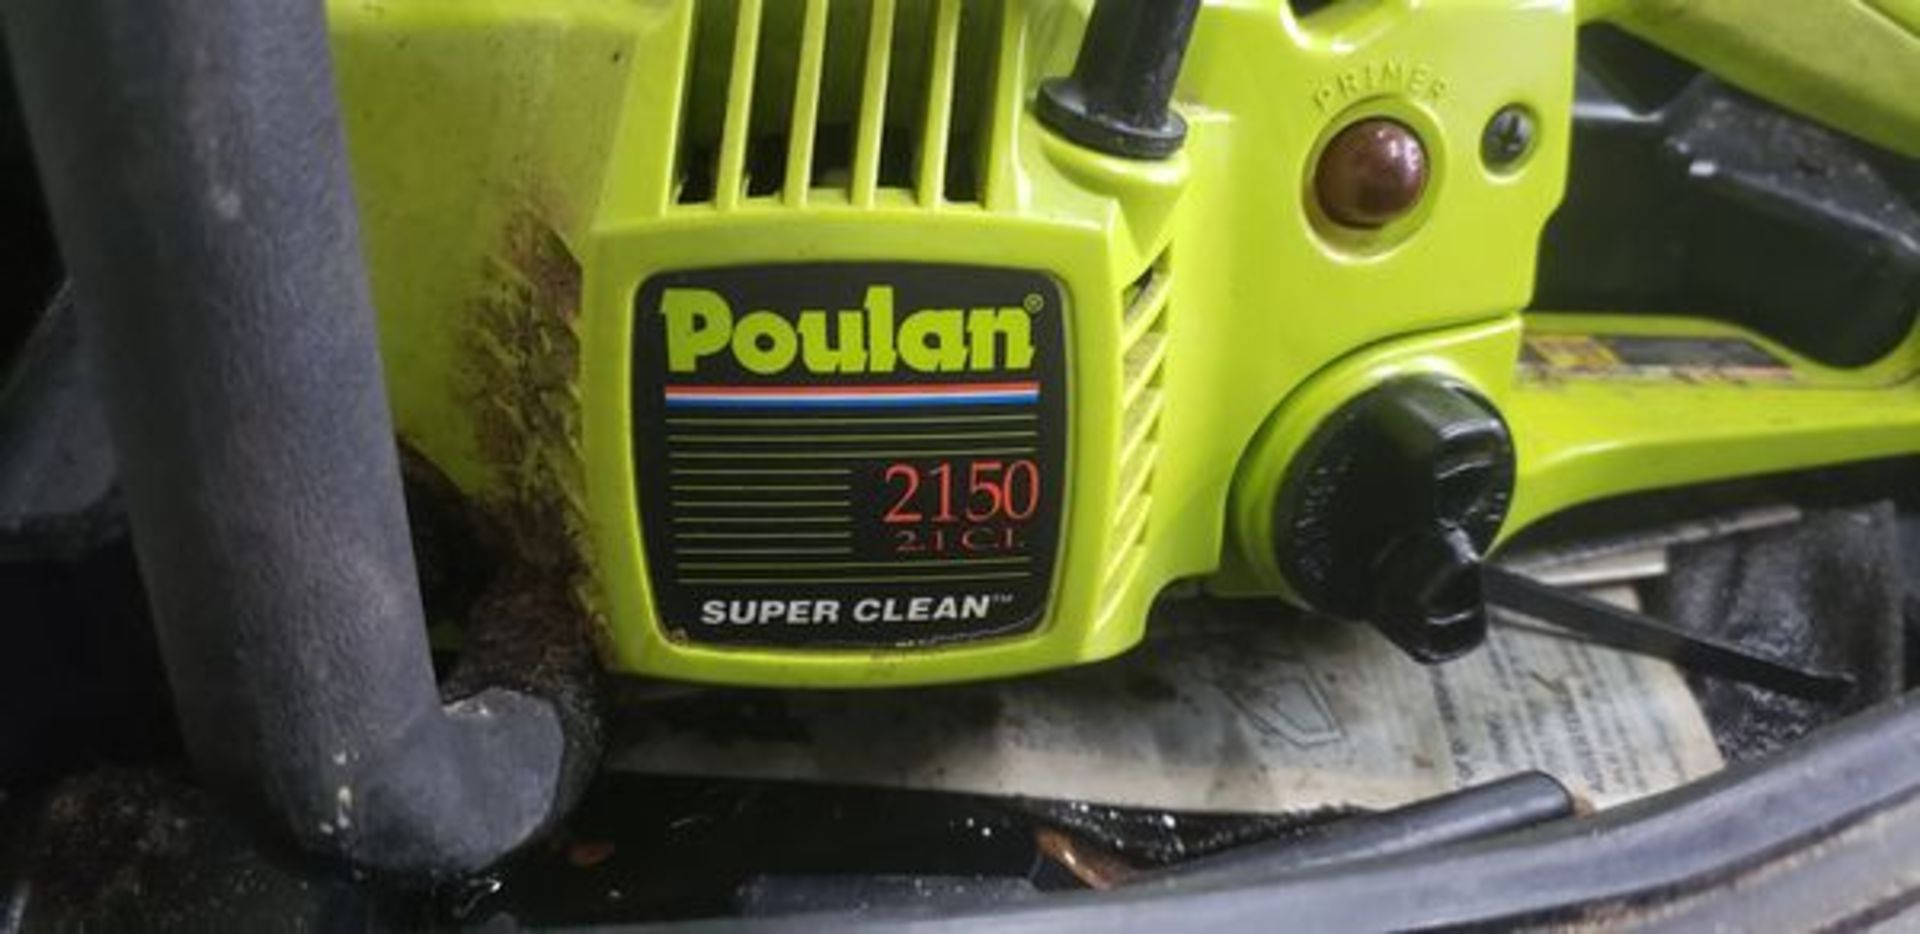 POULAN 2150 CHAIN SAW IN CASE - Image 2 of 4